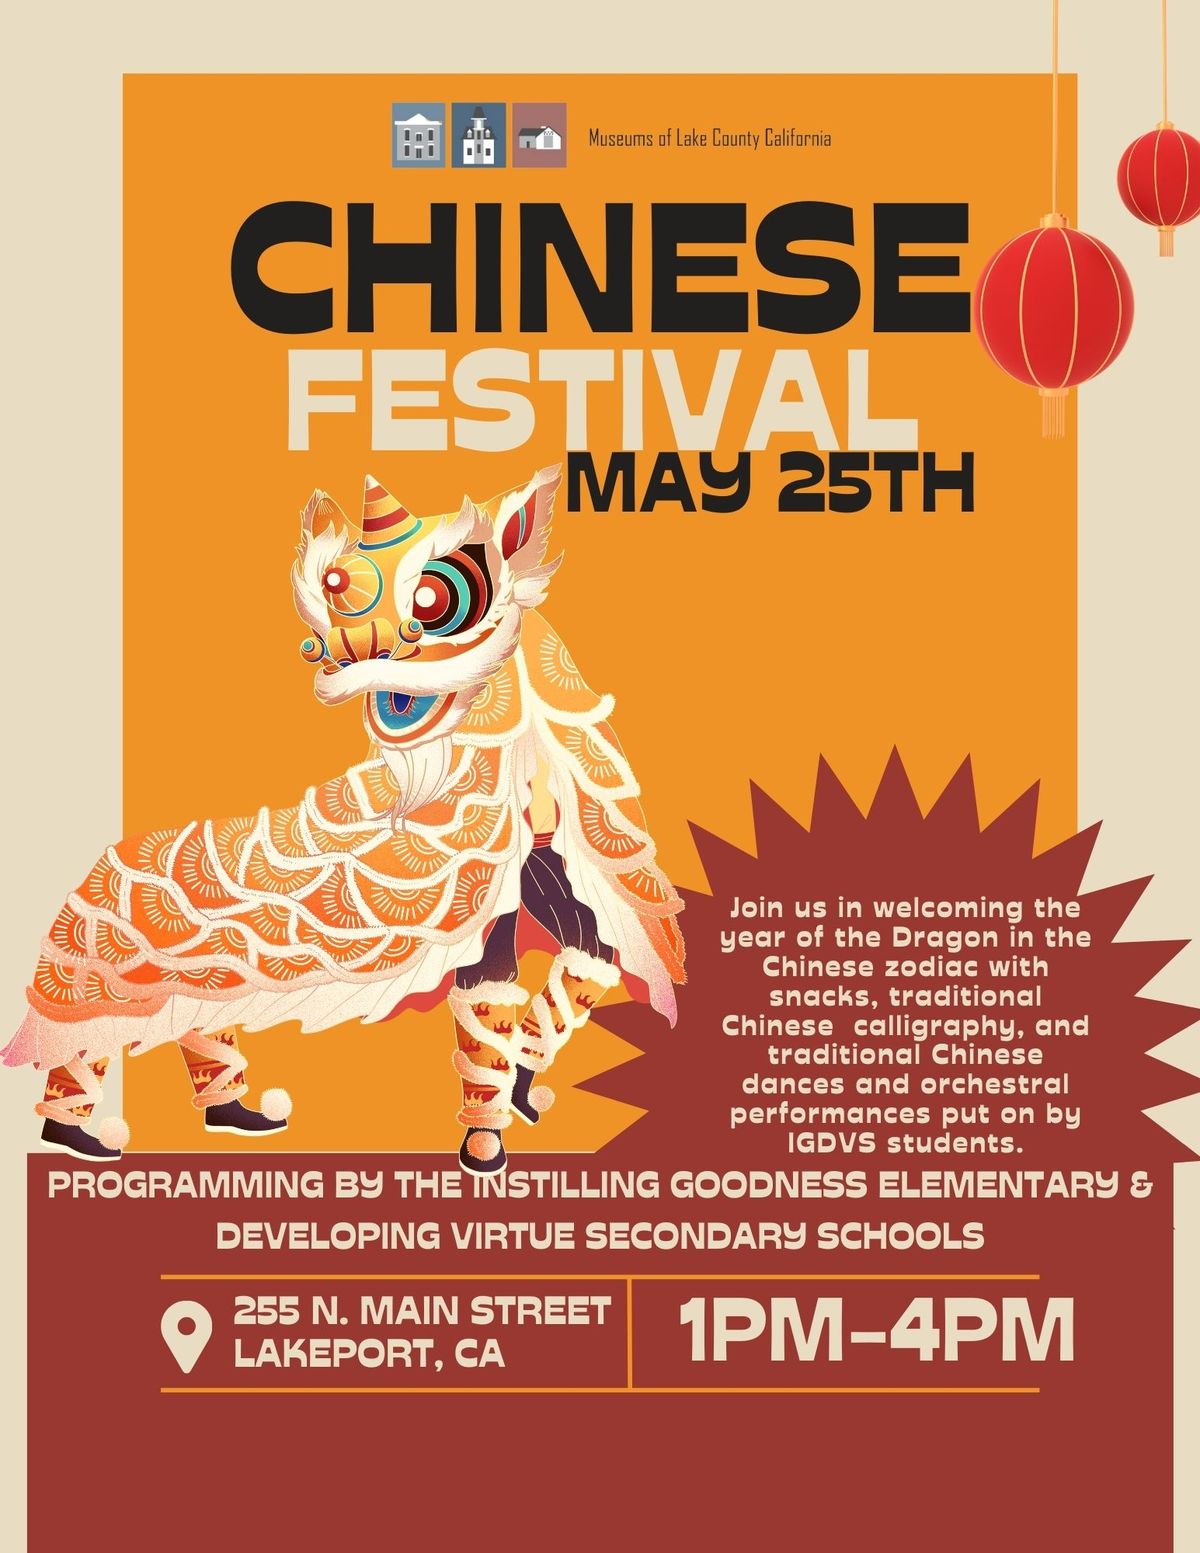 Chinese Festival